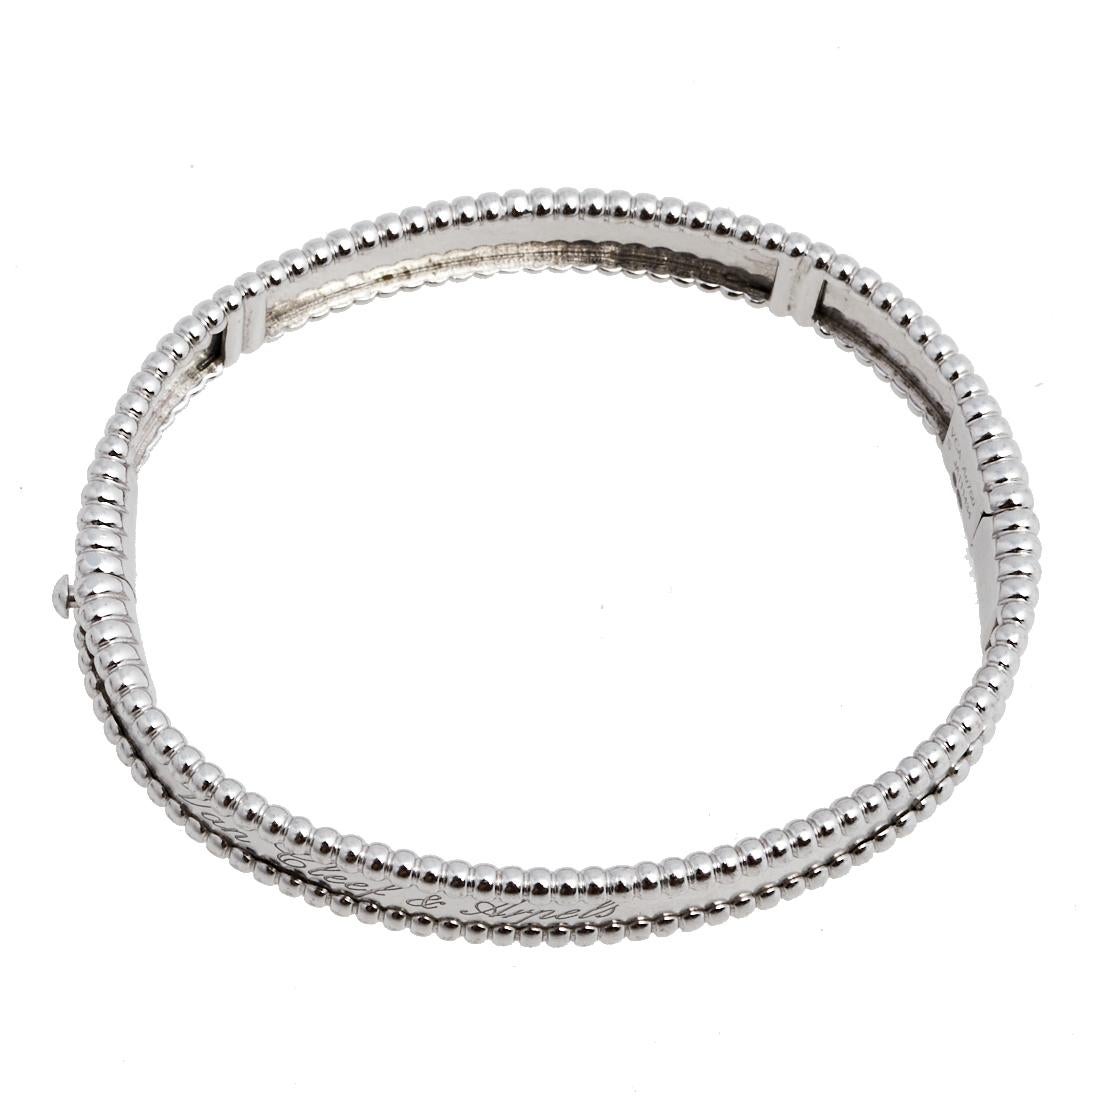 While it may be a dream for many to own a bracelet as beautiful as this one from Van Cleef & Arpels, you can proudly have this very dream sitting on your wrist. Finely created from 18k white gold, the bracelet is visually stunning. Set beautifully